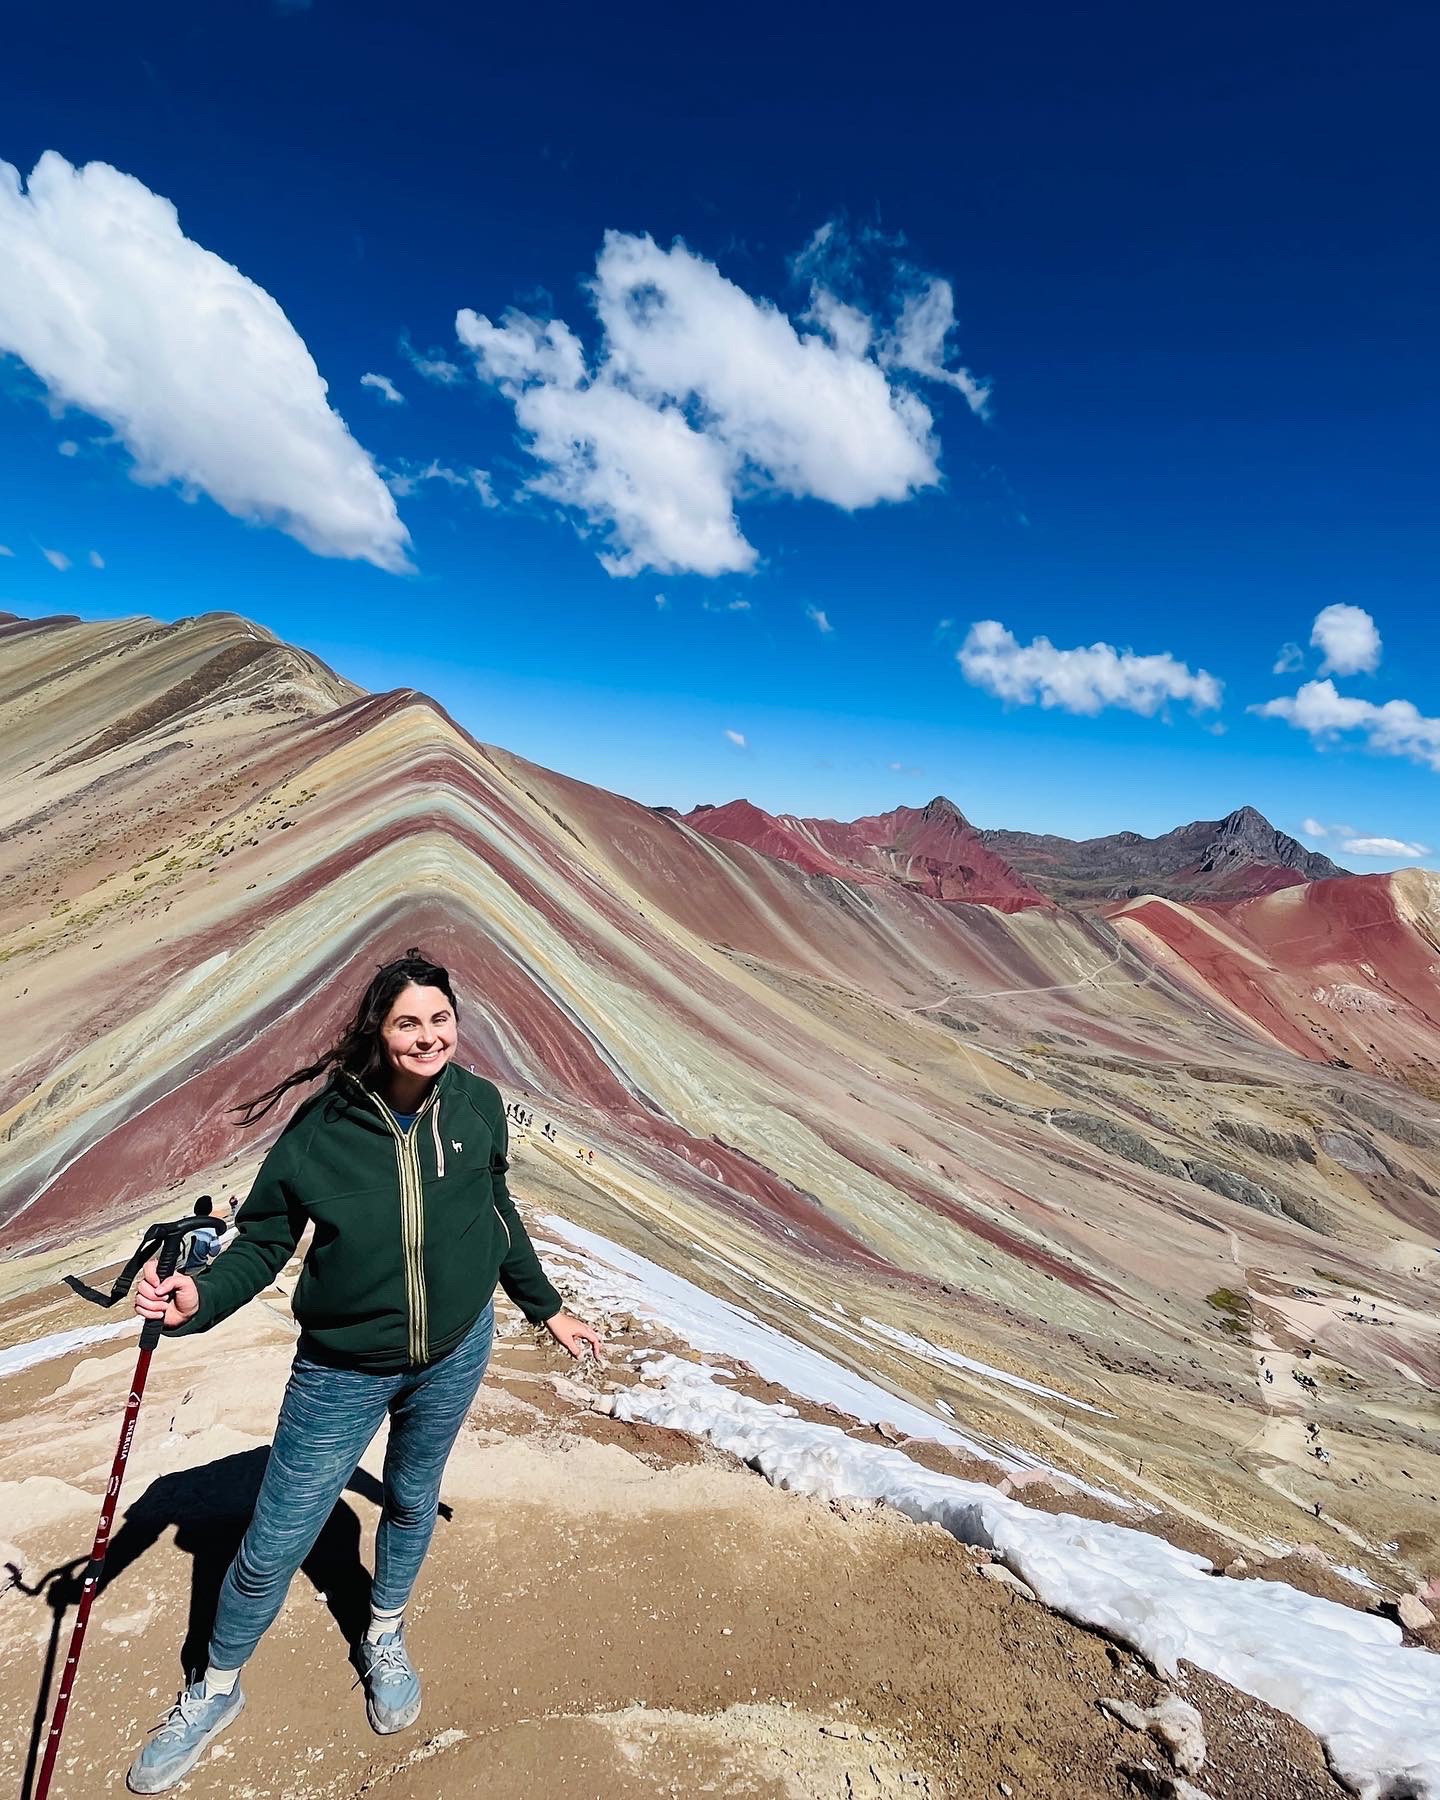 Peru’s Rainbow Mountain: How to avoid the crowds